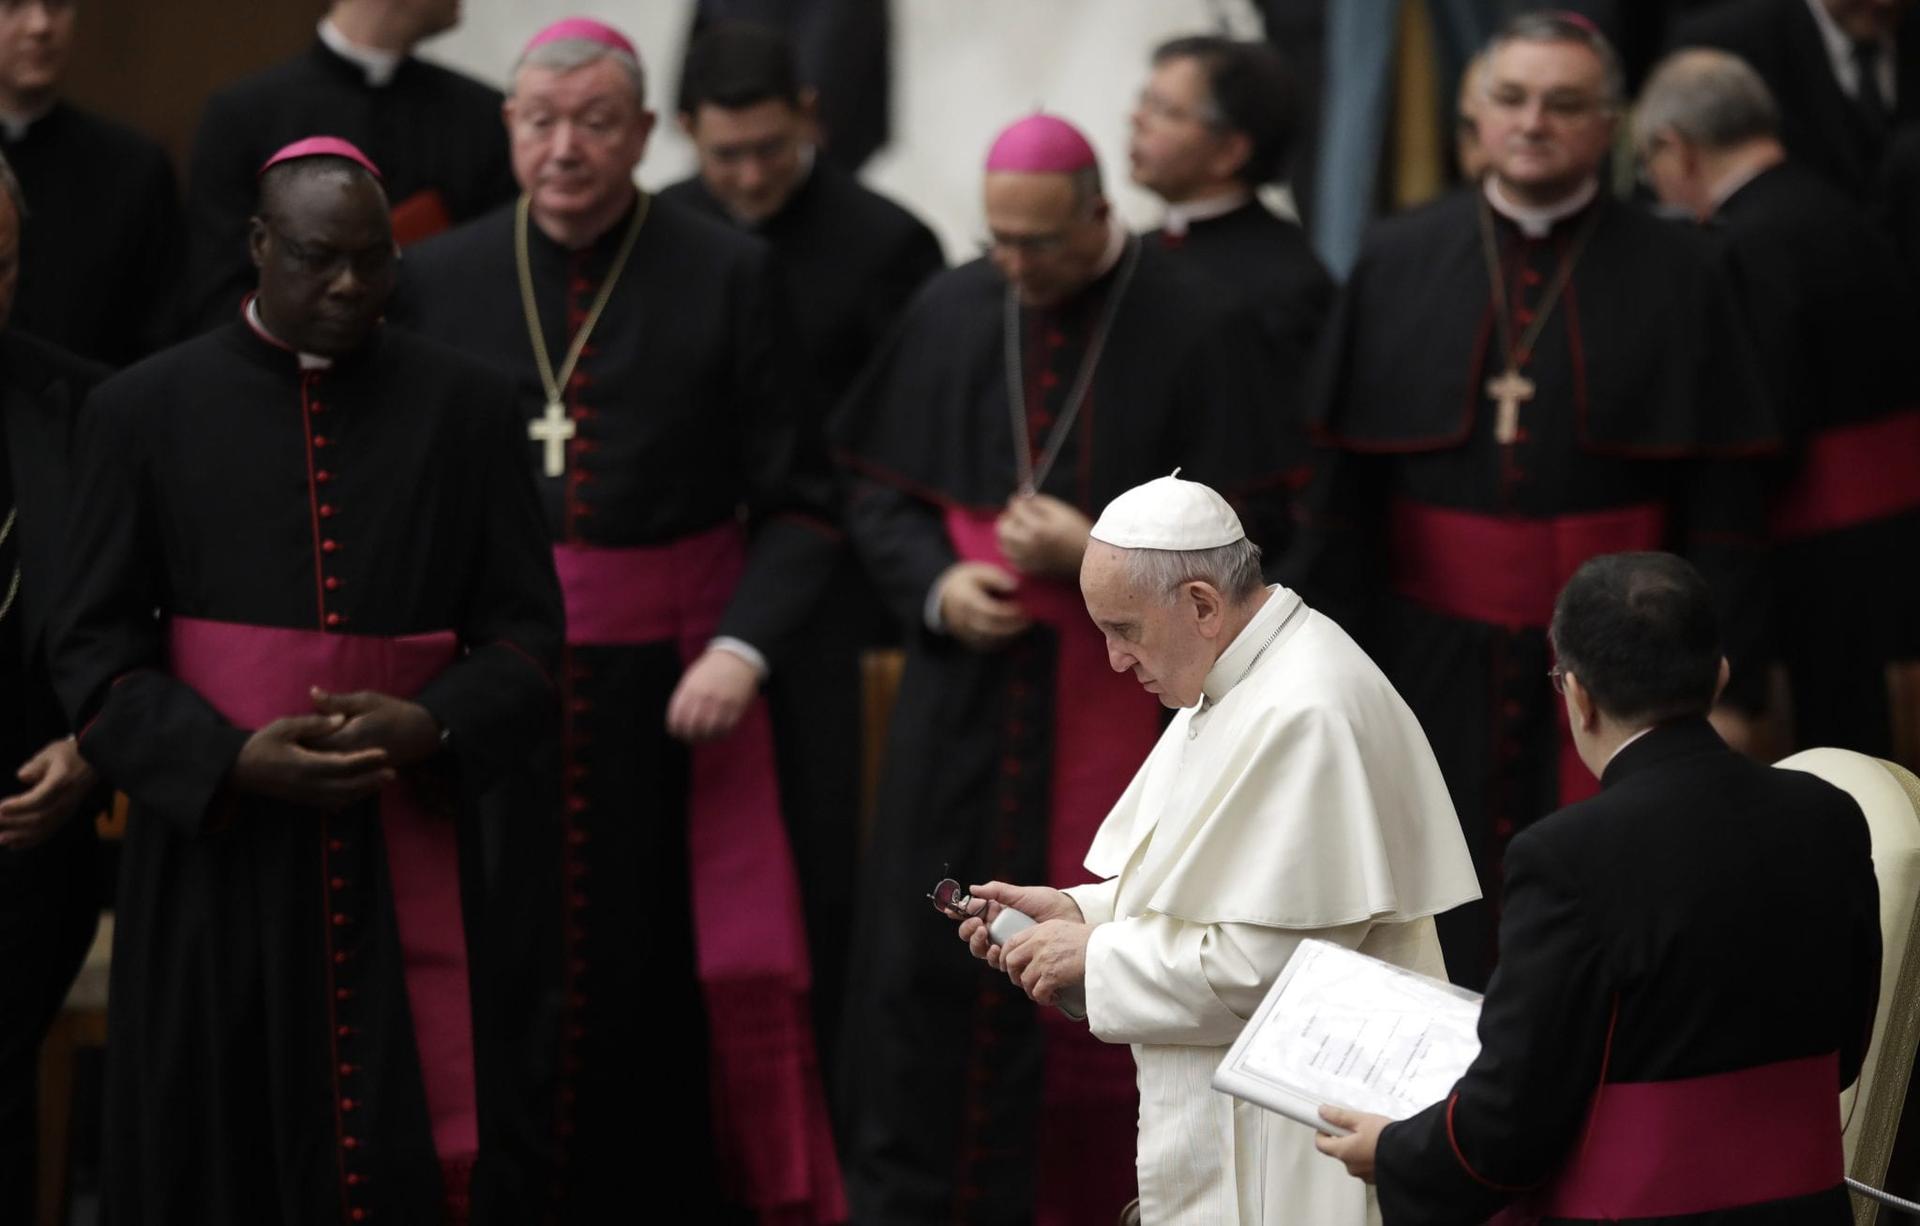 When doubt crops up the devil interferes, pope says